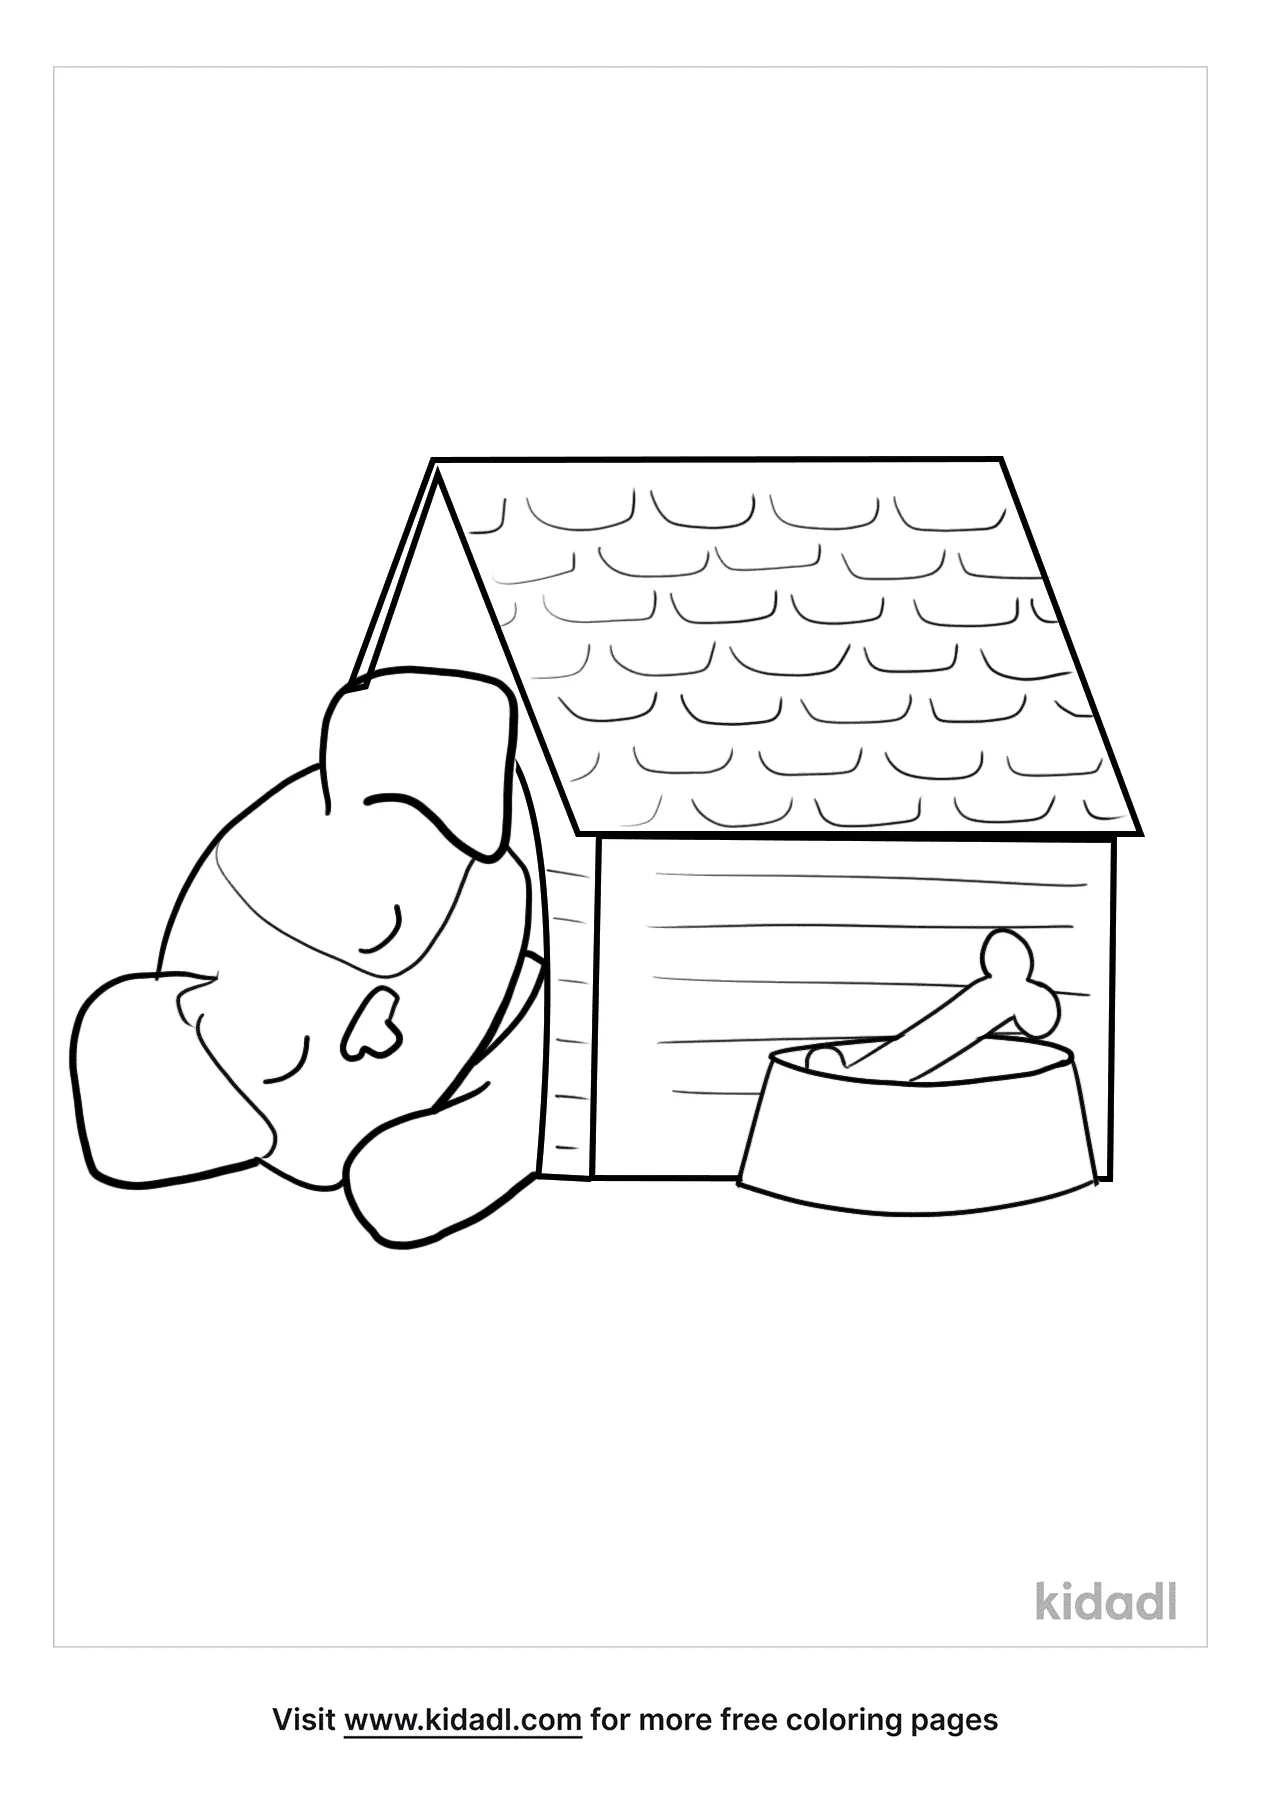 Dog House Coloring Pages Free Buildings Coloring Pages Kidadl